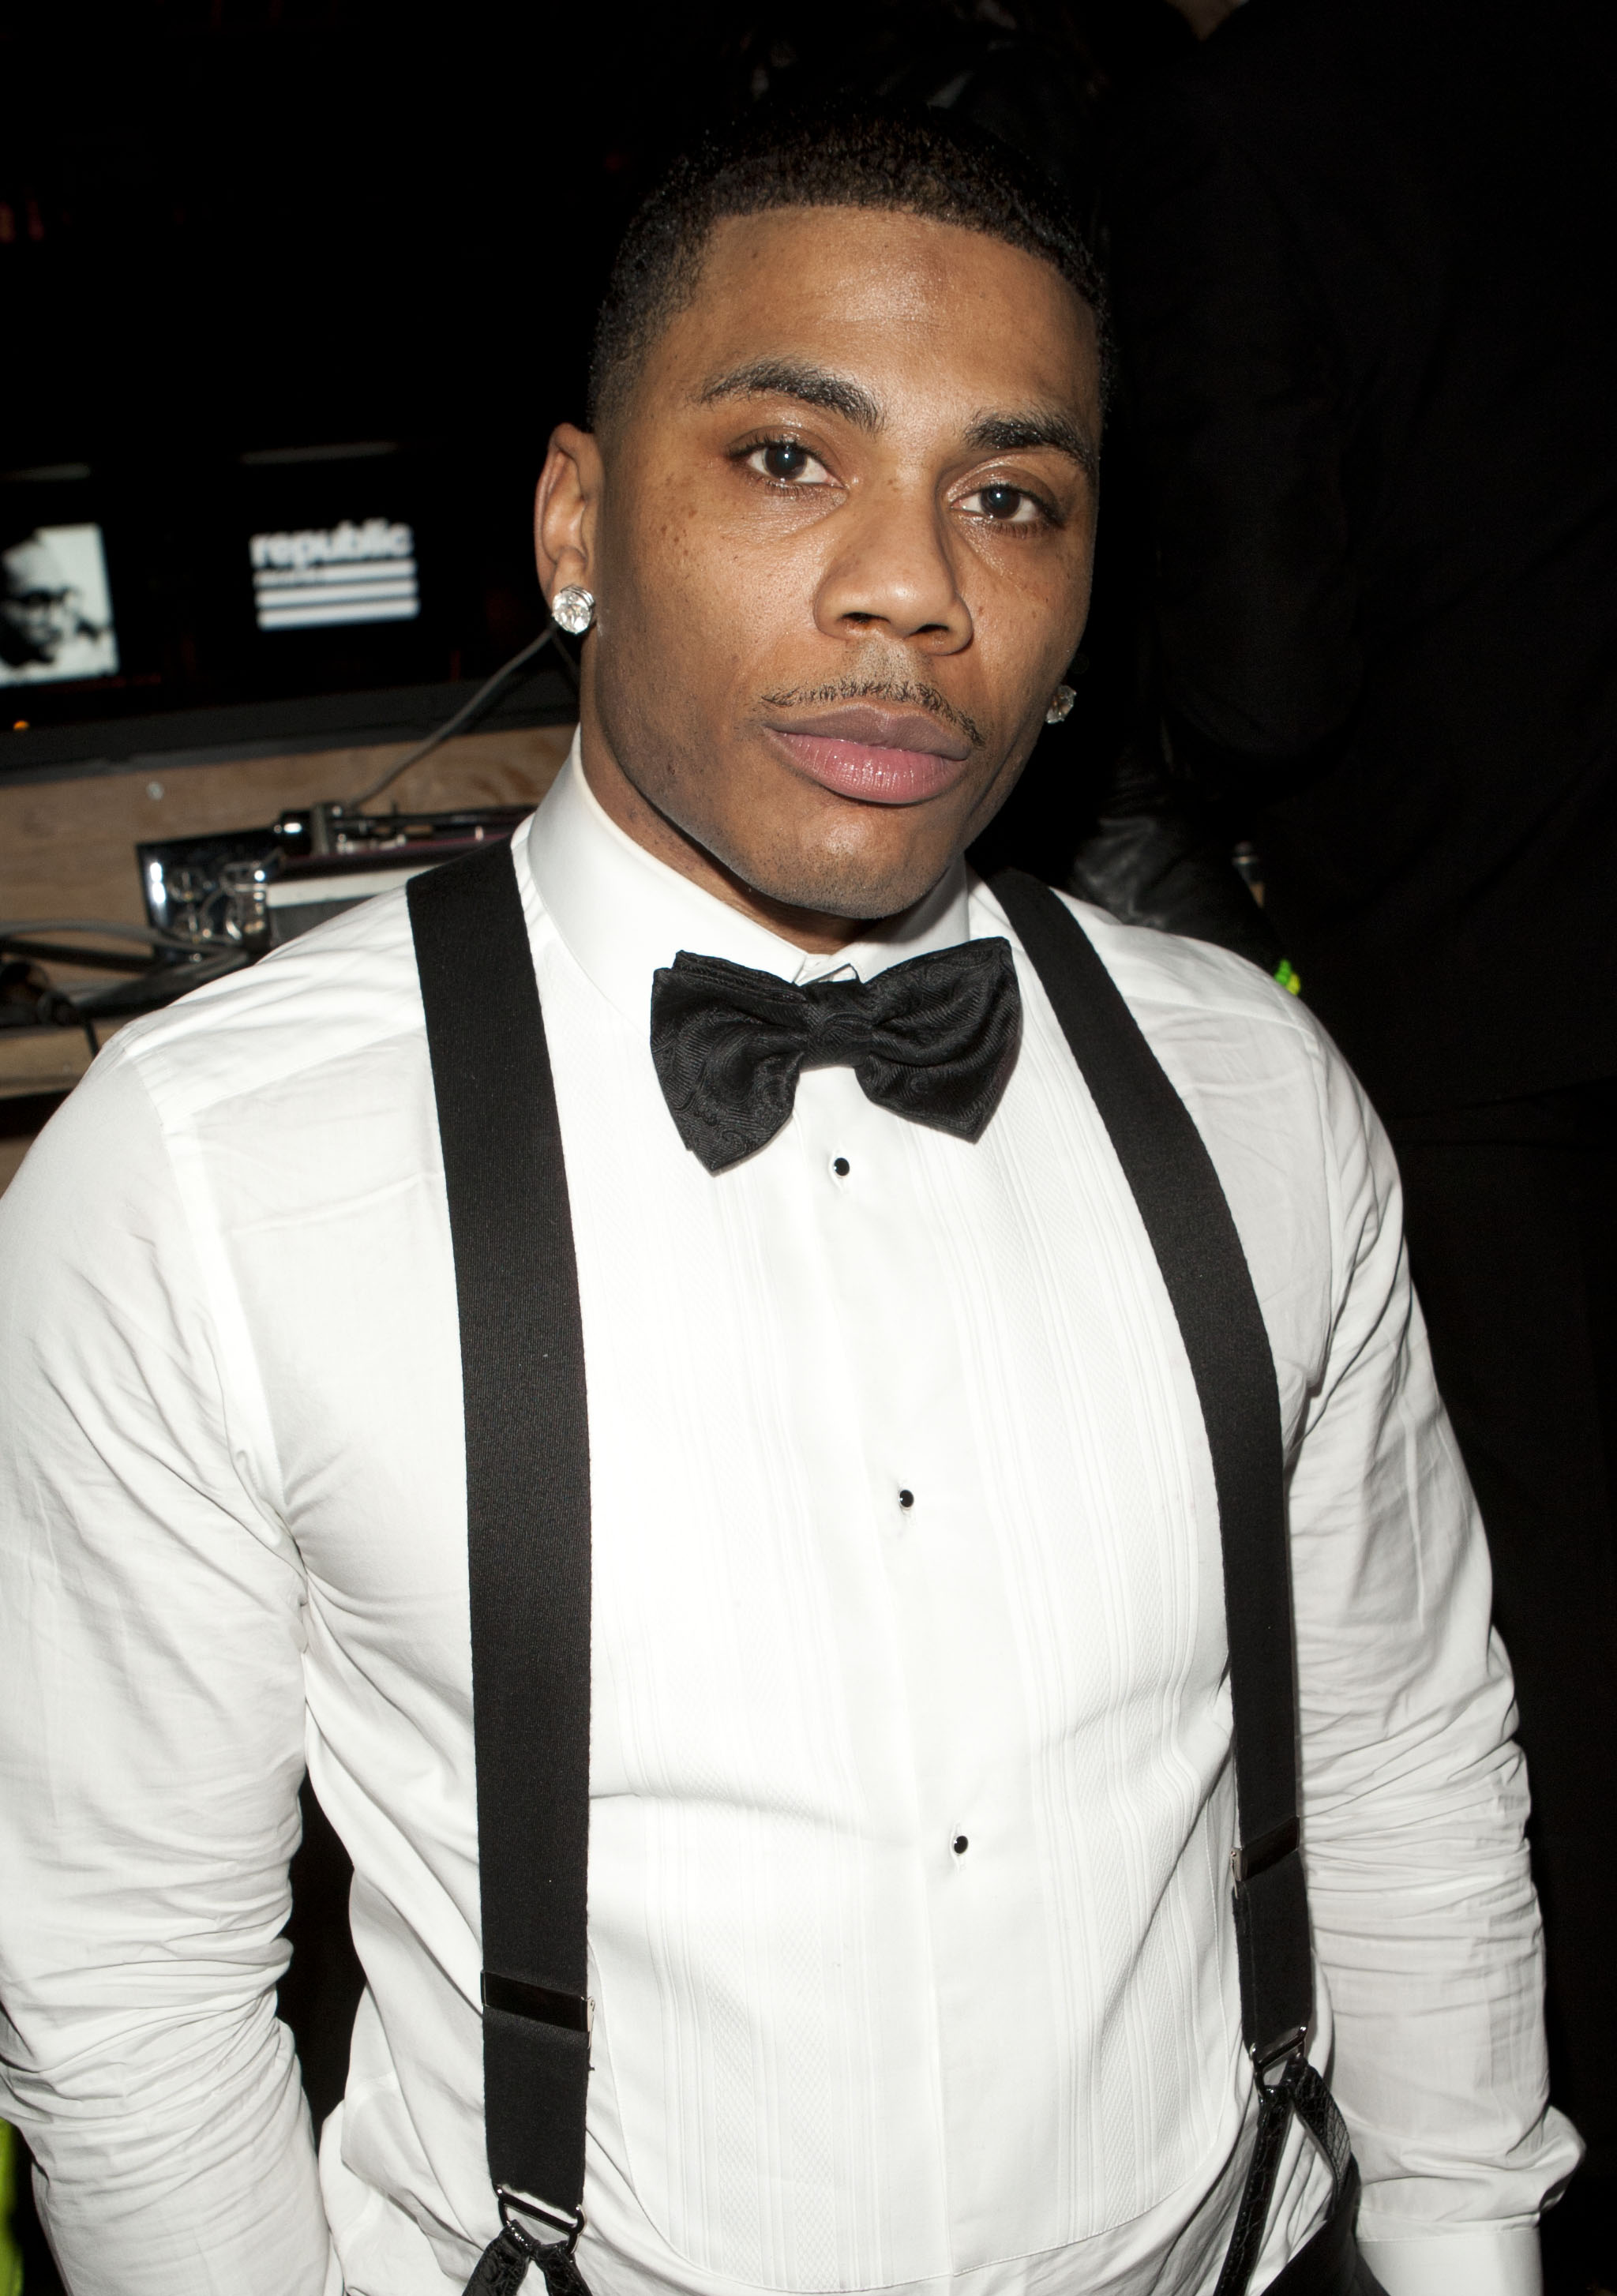 Recording artist Nelly attends Republic Records GRAMMY Party on January 26, 2014 in Los Angeles, California.  (Photo by Michael Bezjian/WireImage)